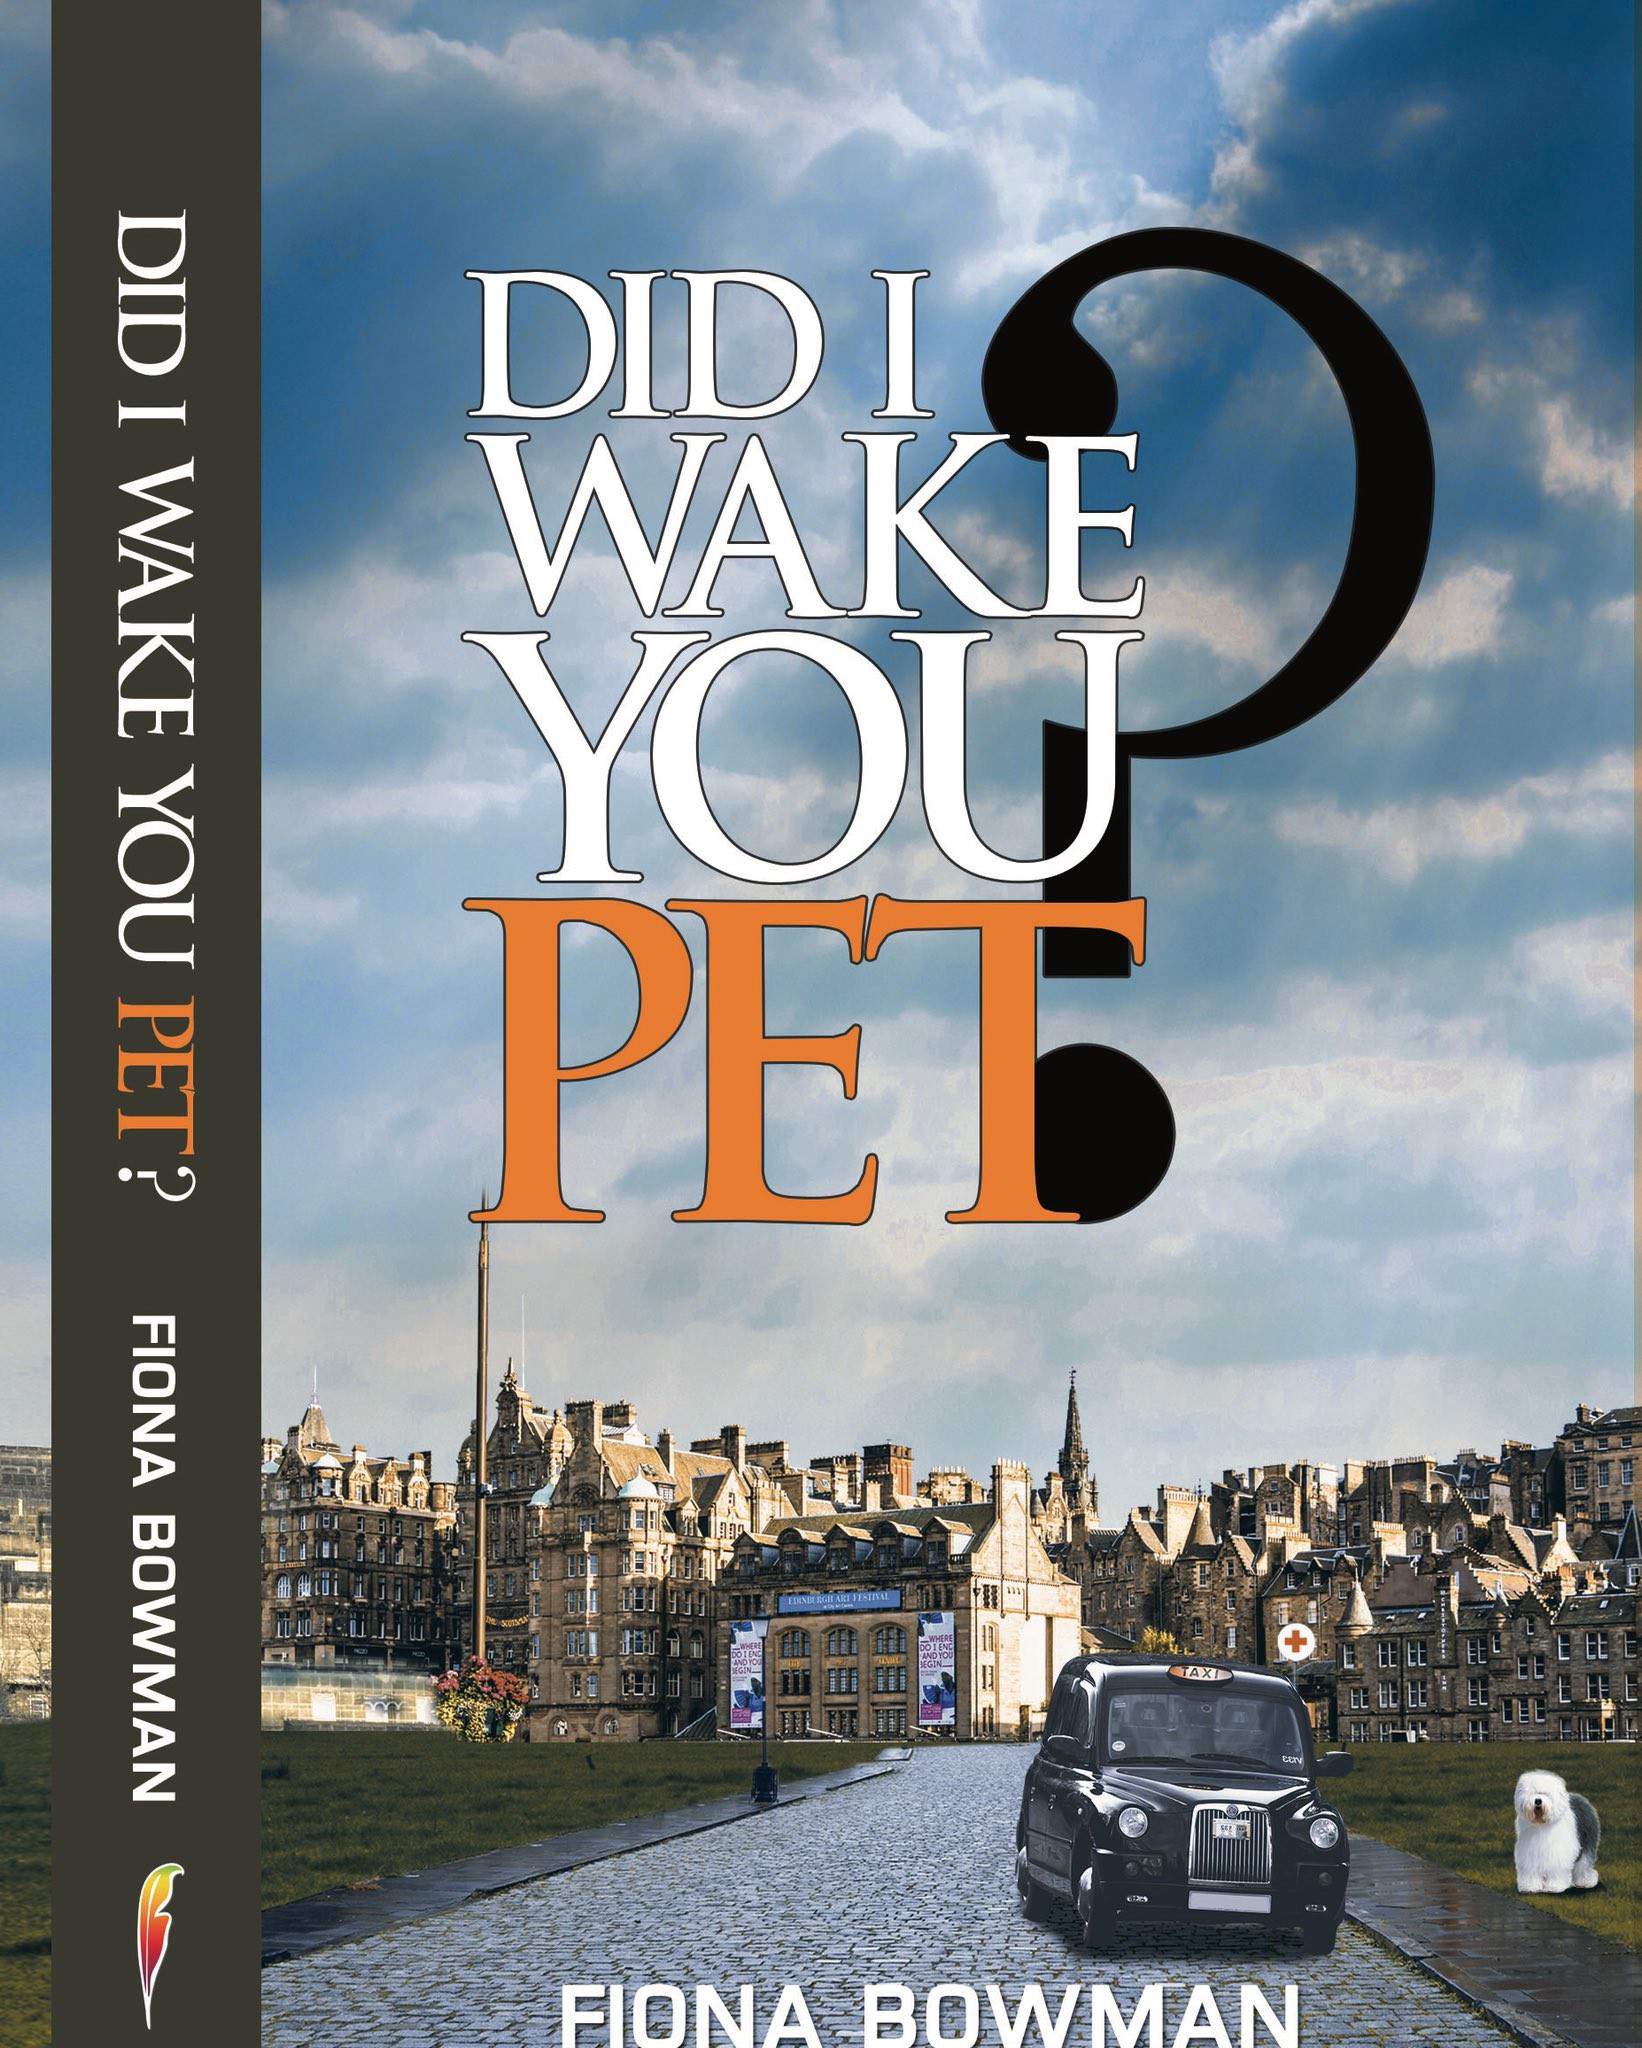 Fiona Bowman’s ‘Did I Wake You, Pet?’ featured on this week in FM